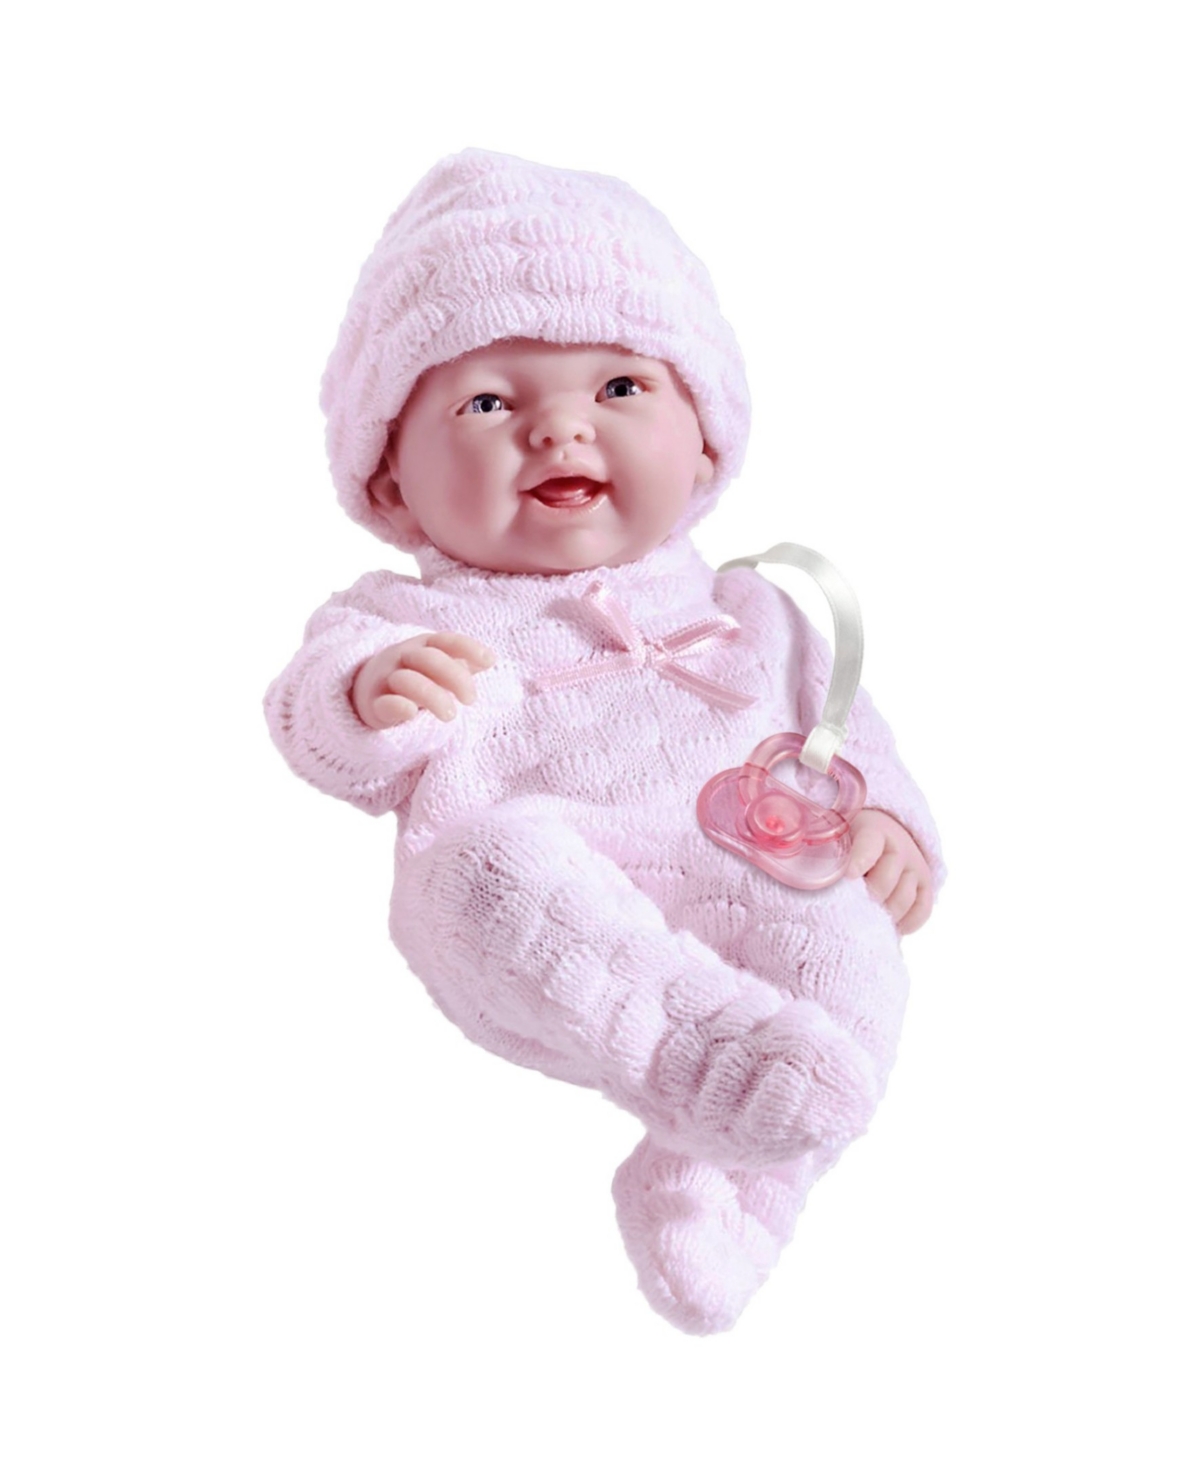 Jc Toys Mini La Newborn 9.5" Real Girl Baby Doll Pink Outfit In Girl - Pink